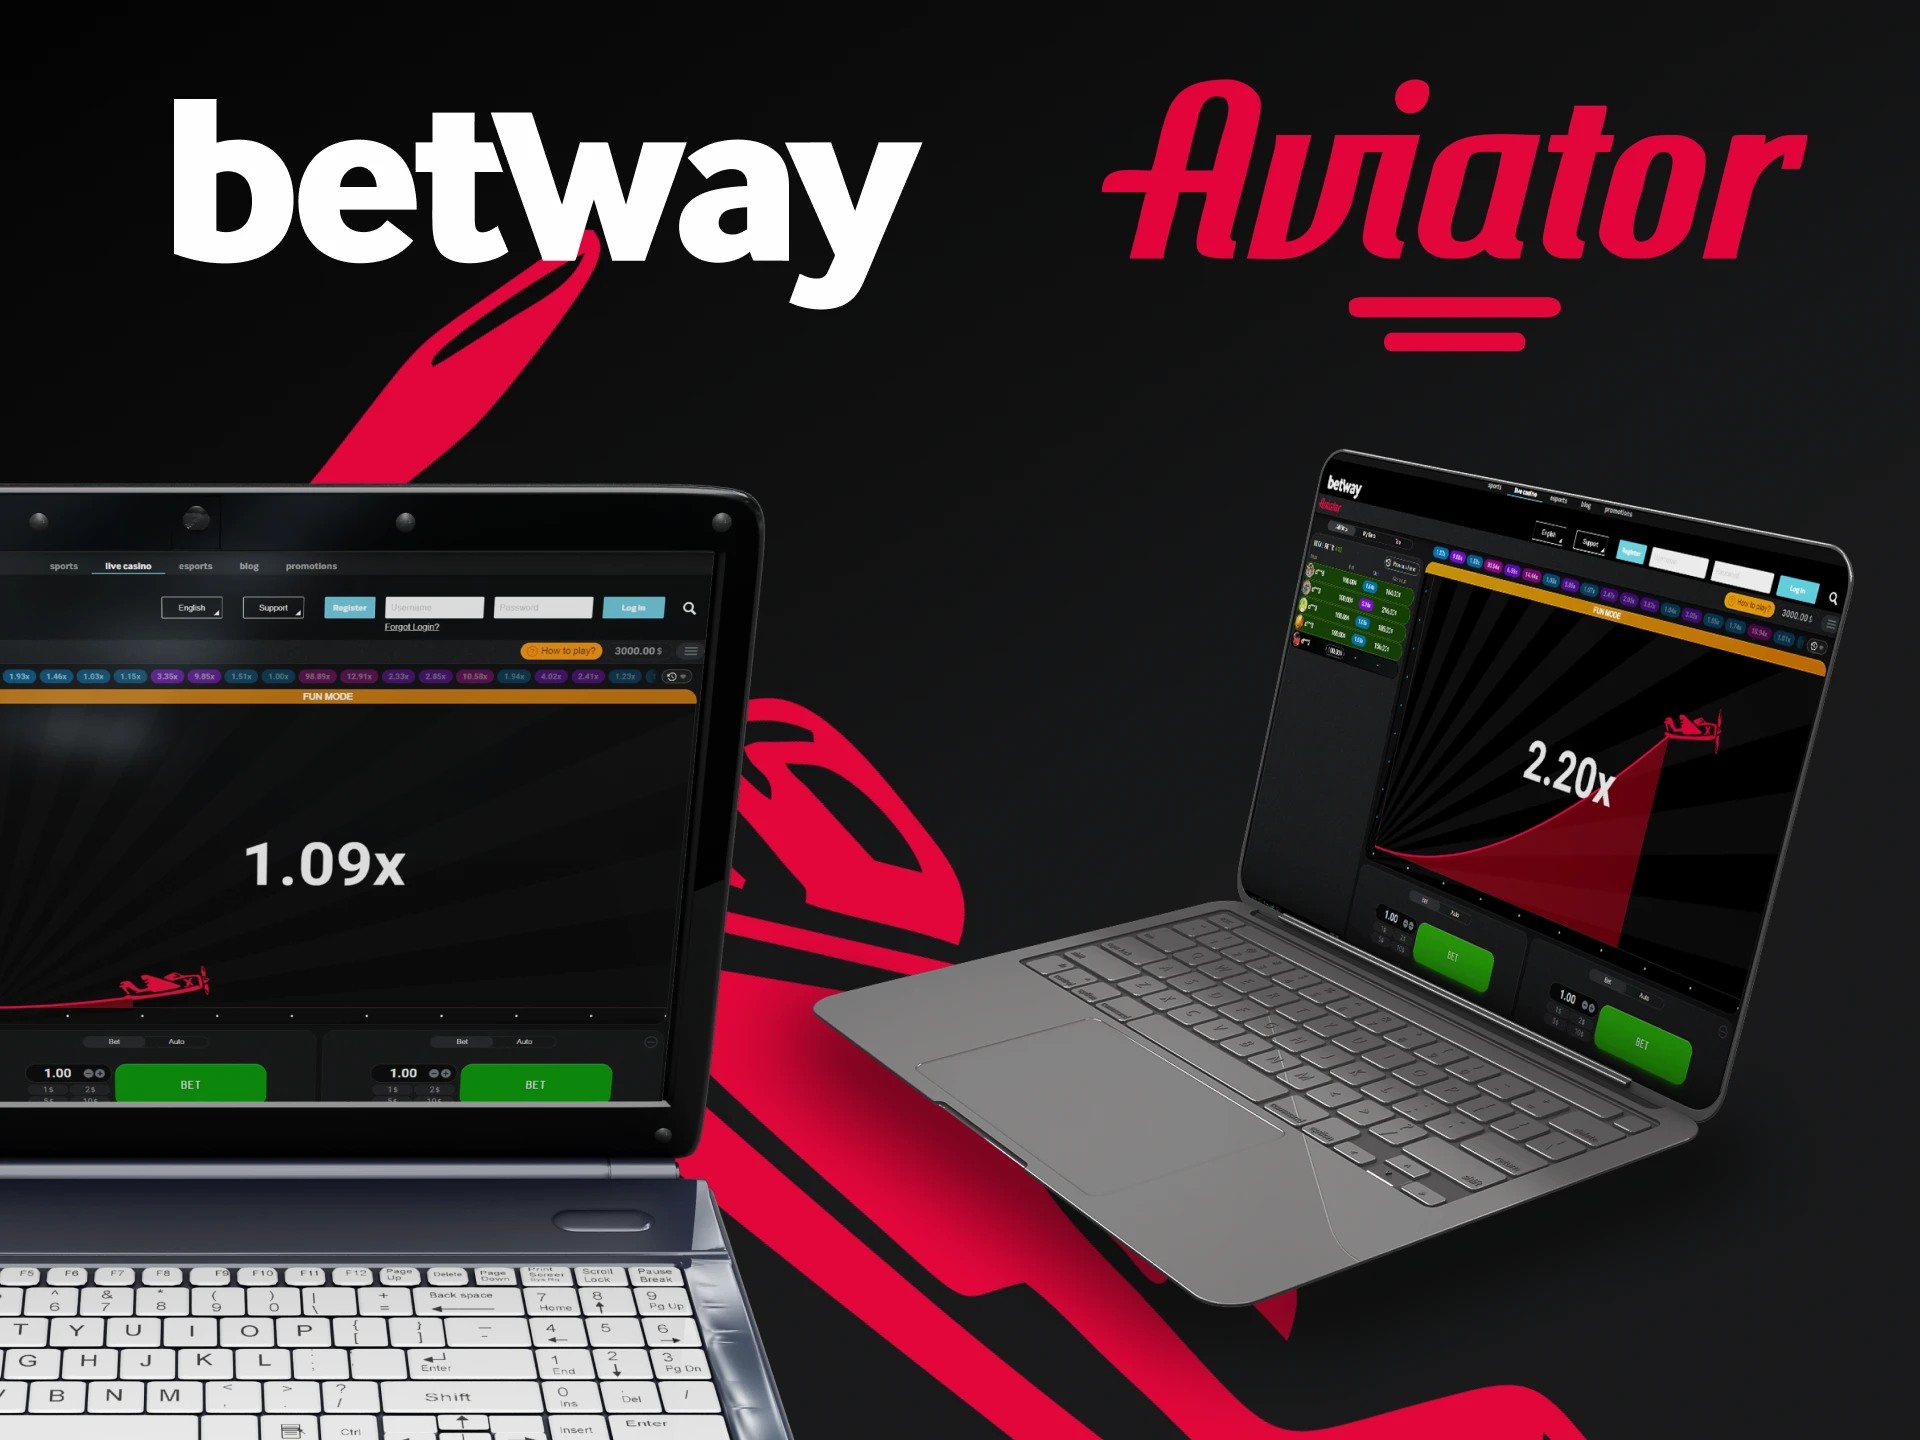 Find out on which device it will be convenient for you to play Aviator from Betway.